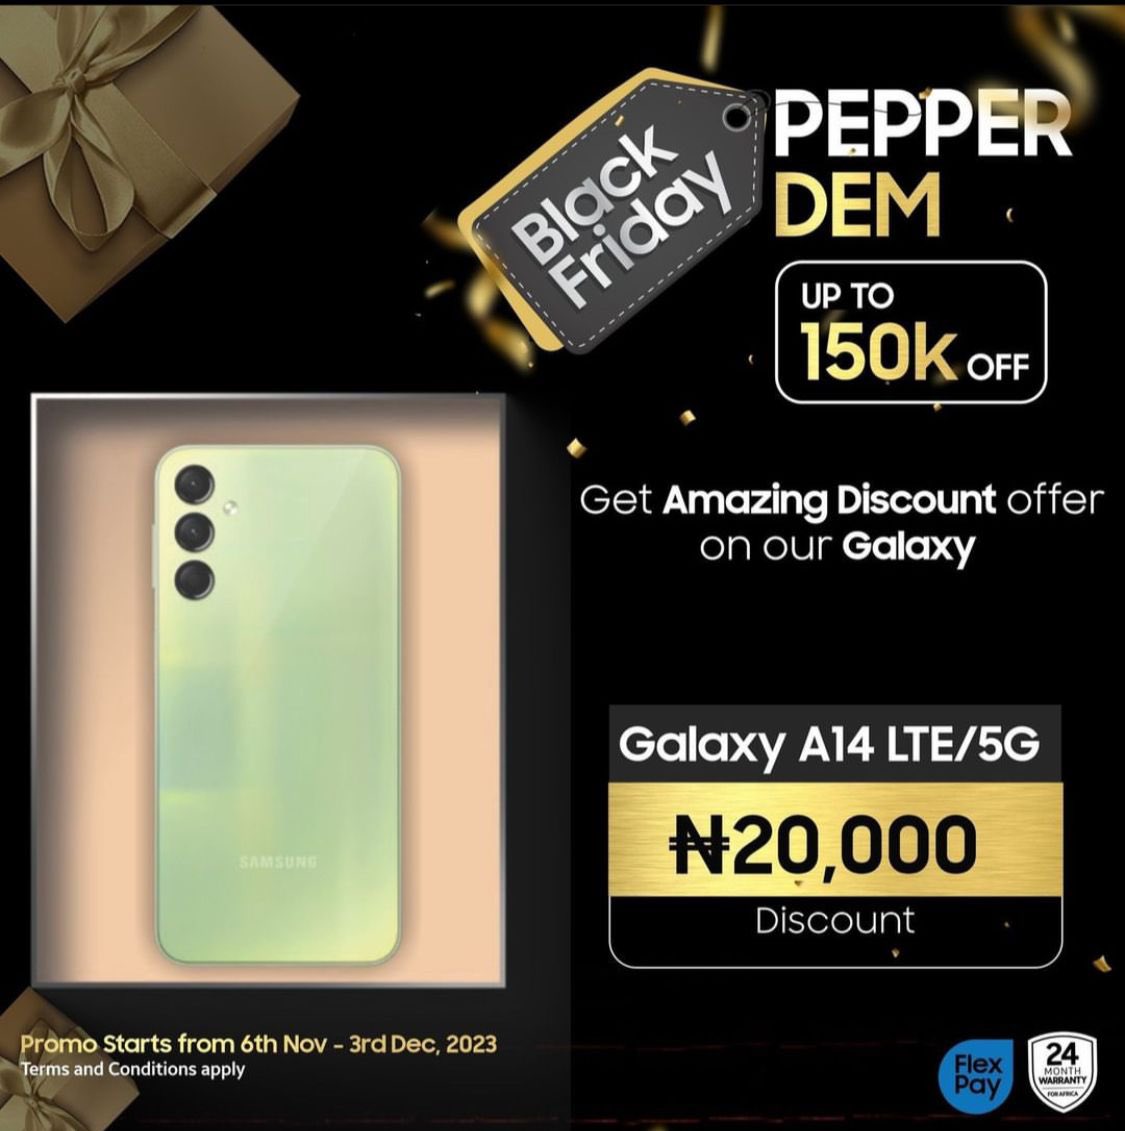 Guys this #GalaxyA14 phone will make you be feeling like a boss. The dazzling screen, sound of its speakers and camera quality is top notch👌🏼

The price is shocking because it’s so cool mehn #SamsungBlackFriday